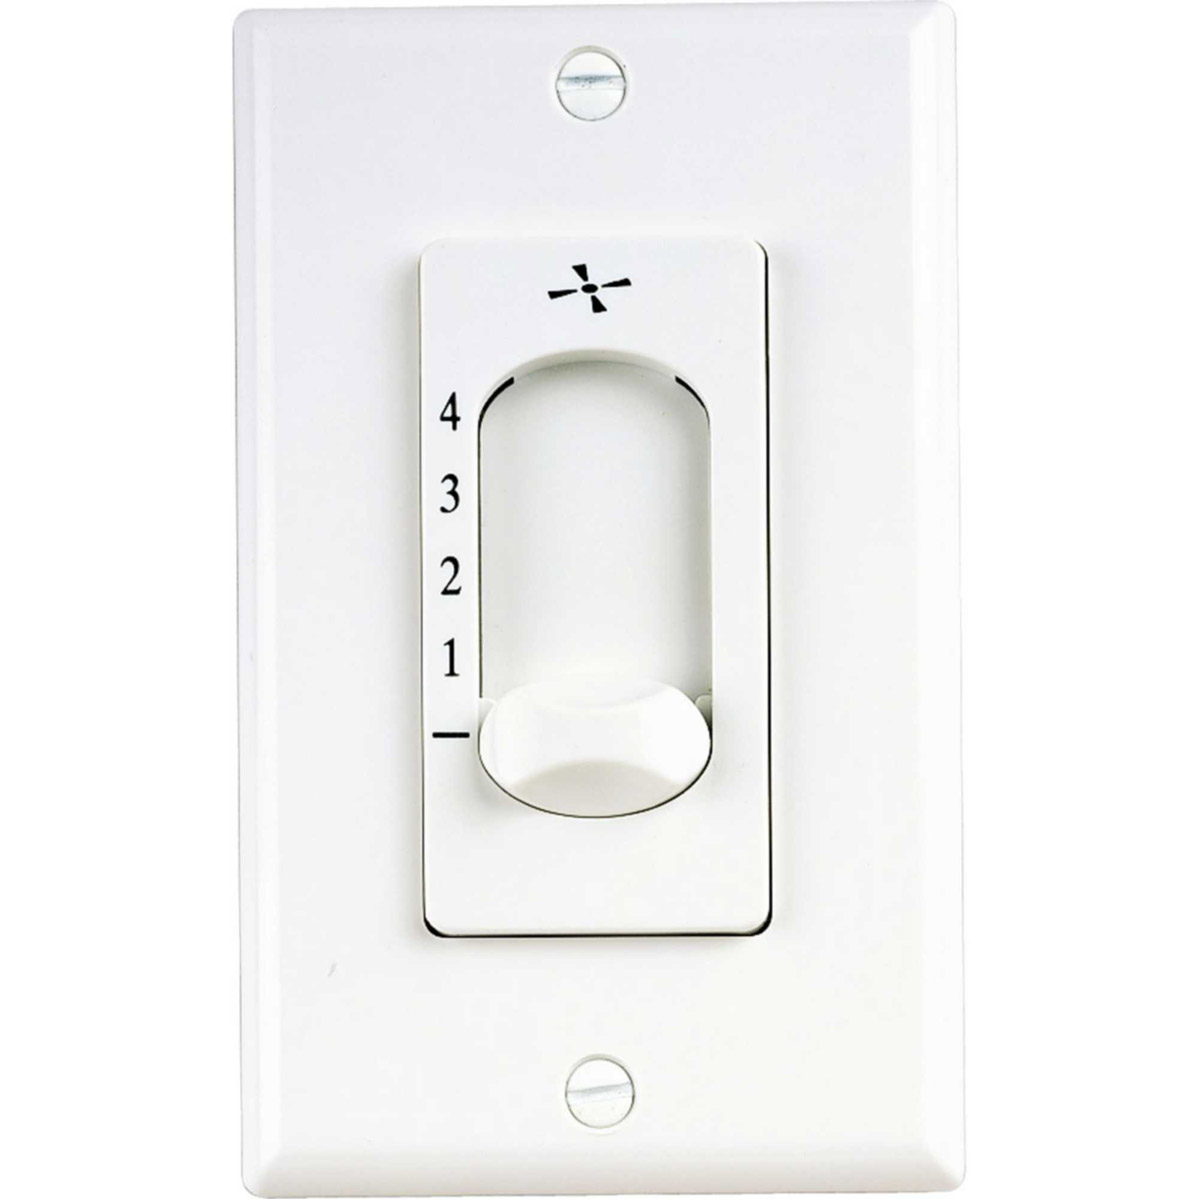 Airpro White Ceiling Fan Wall Control